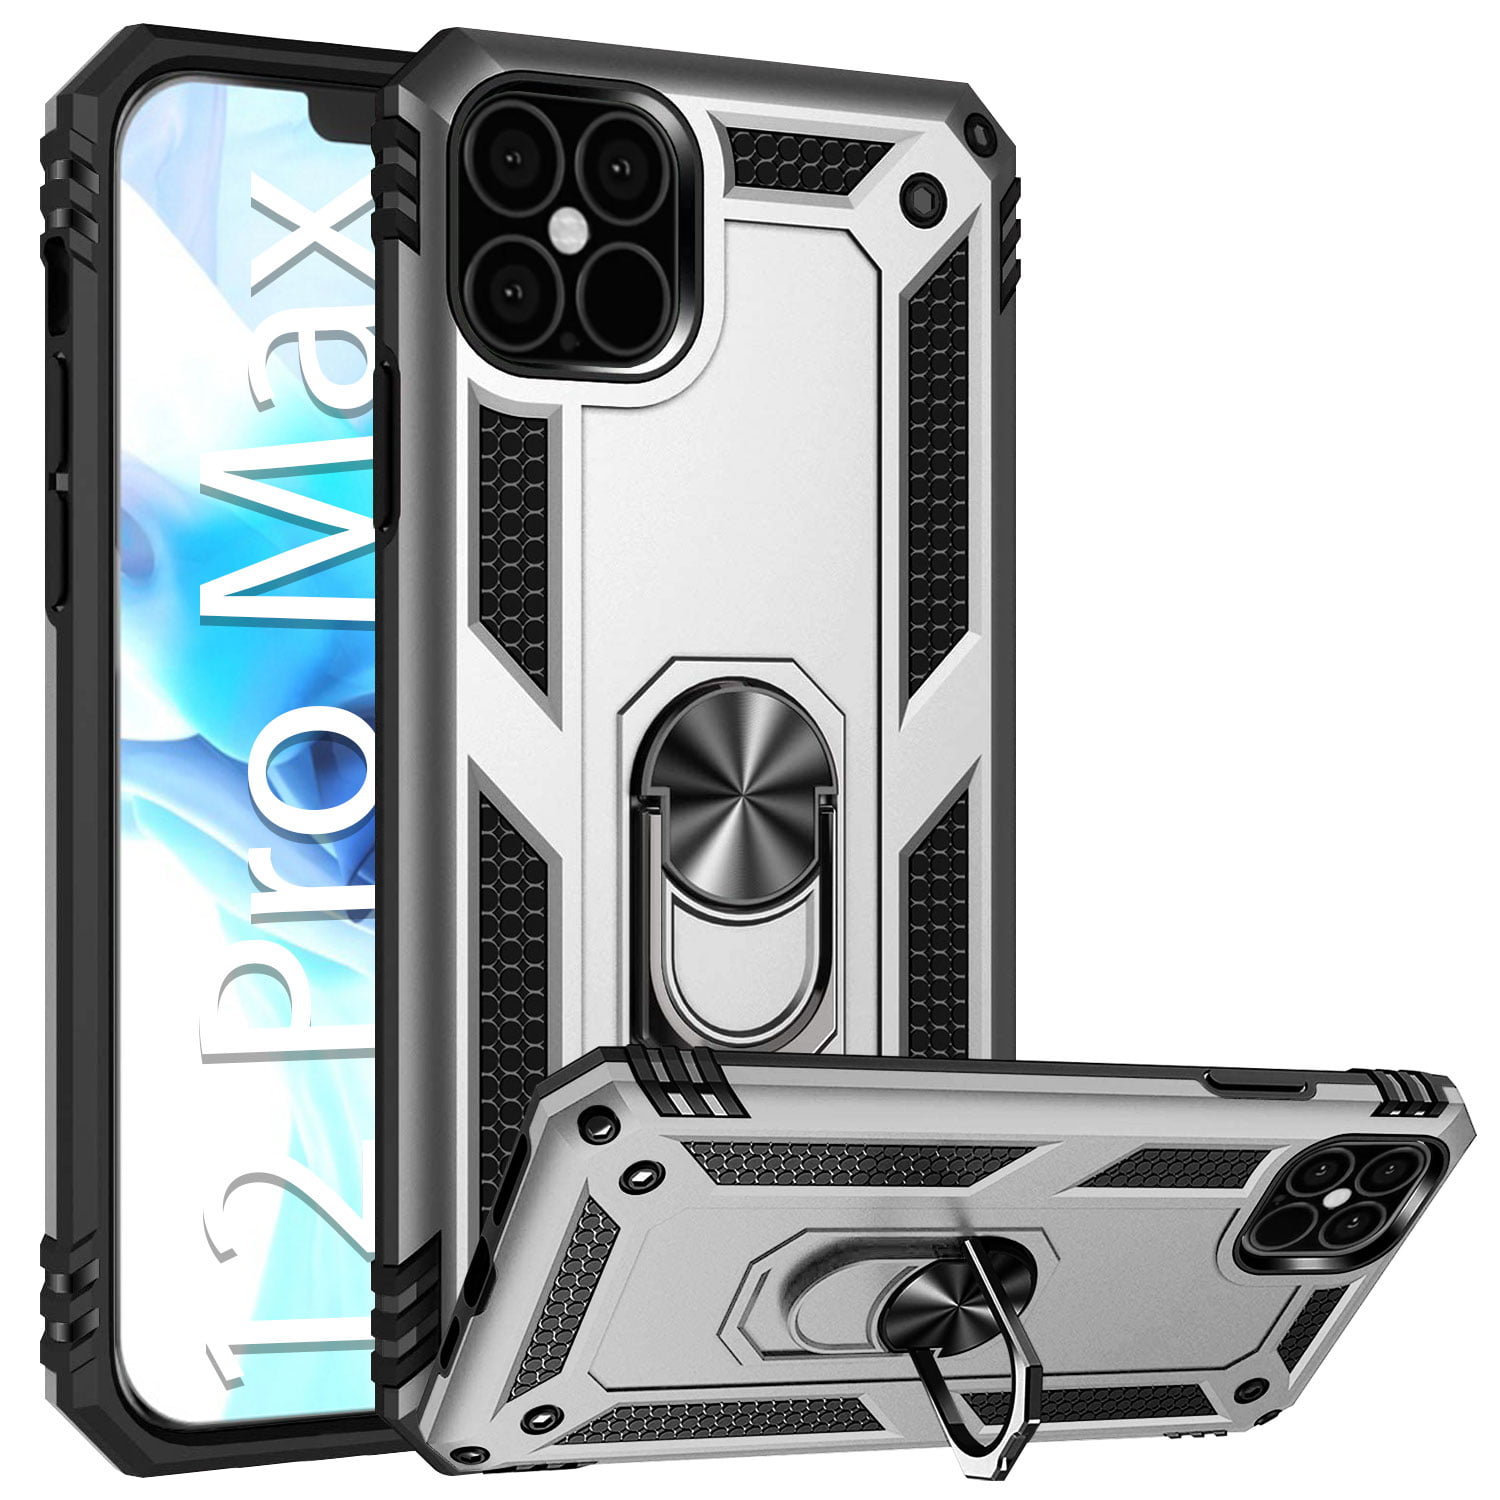 Cellet Heavy Duty Iphone 12 Pro Max Combo Case Shockproof Case With Built In Ring Kickstand And Magnet For Car Mounts Compatible To Apple Iphone 12 Pro Max Silver Walmart Com Walmart Com